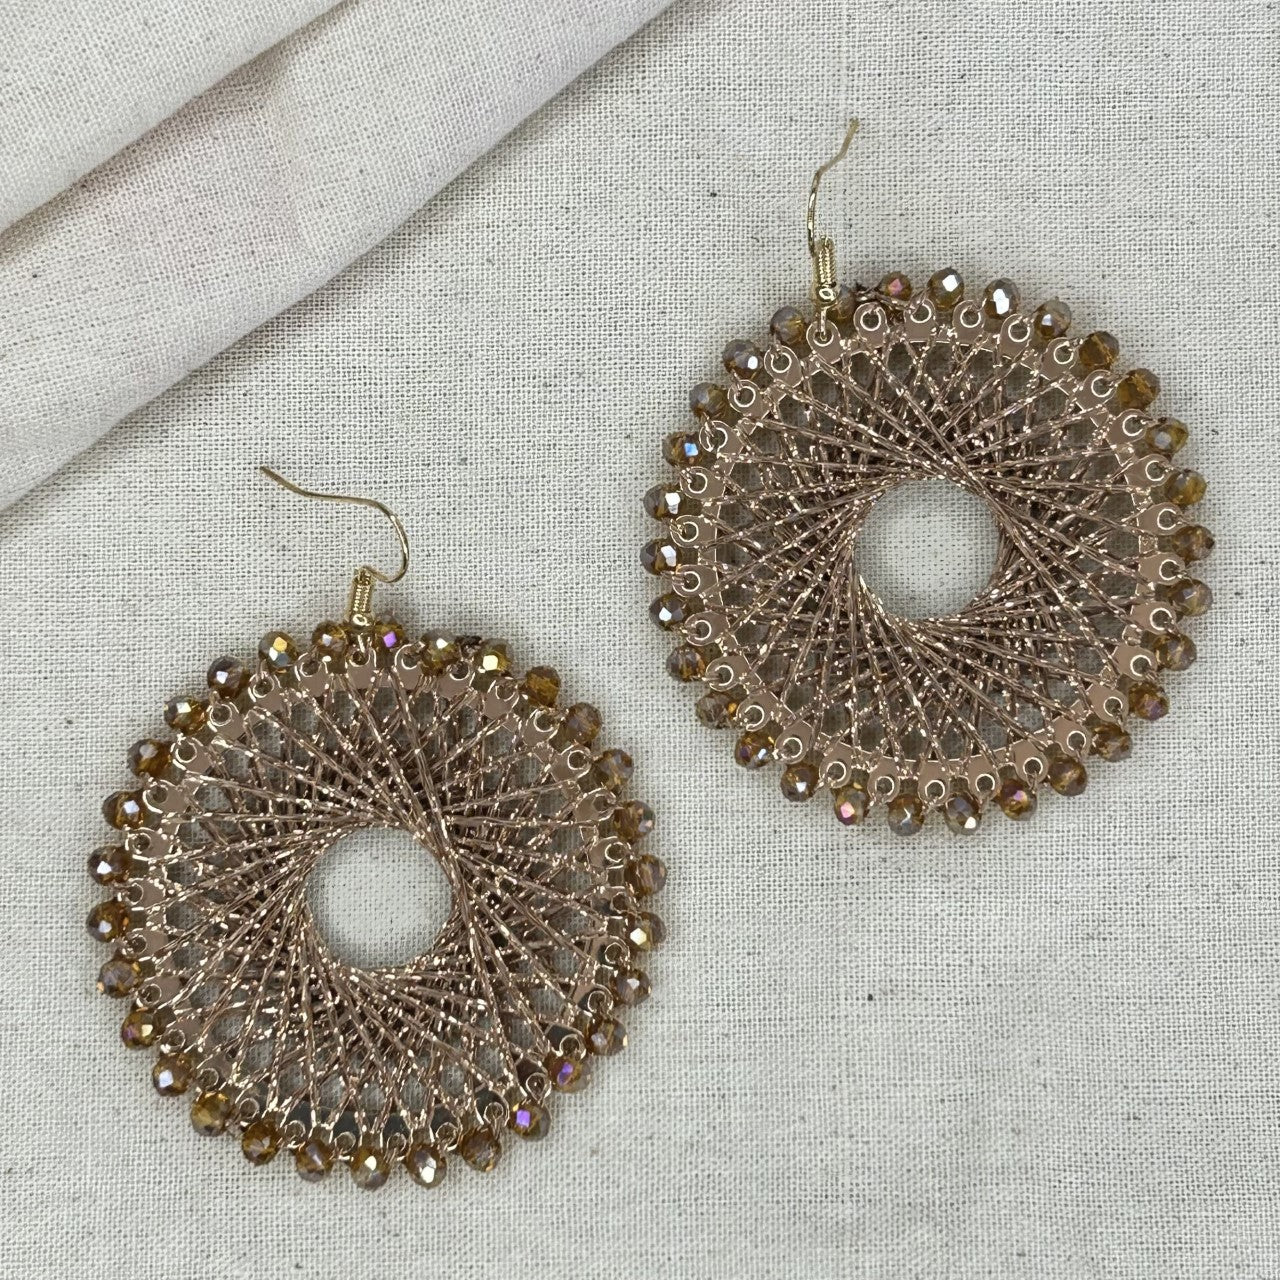 Angelco Accessories Colour burst circle earrings on linen background - gold